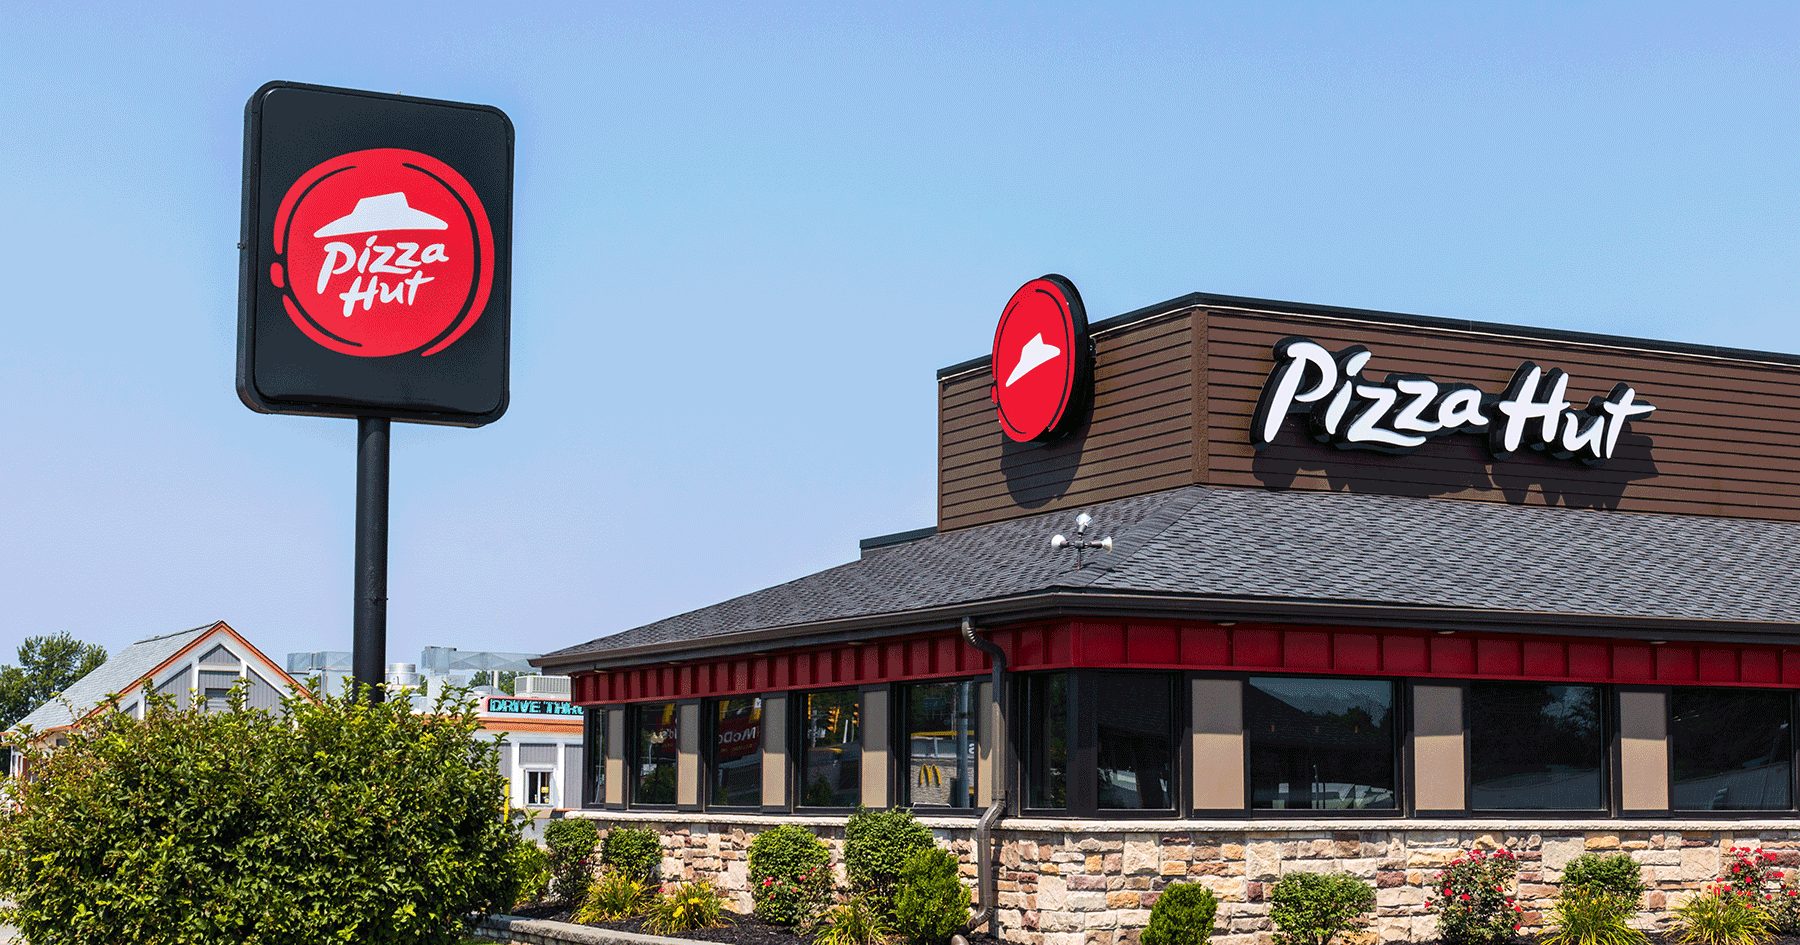 Pizza Hut menu prices featuring 169 items ranging from $0.60 to $37.98